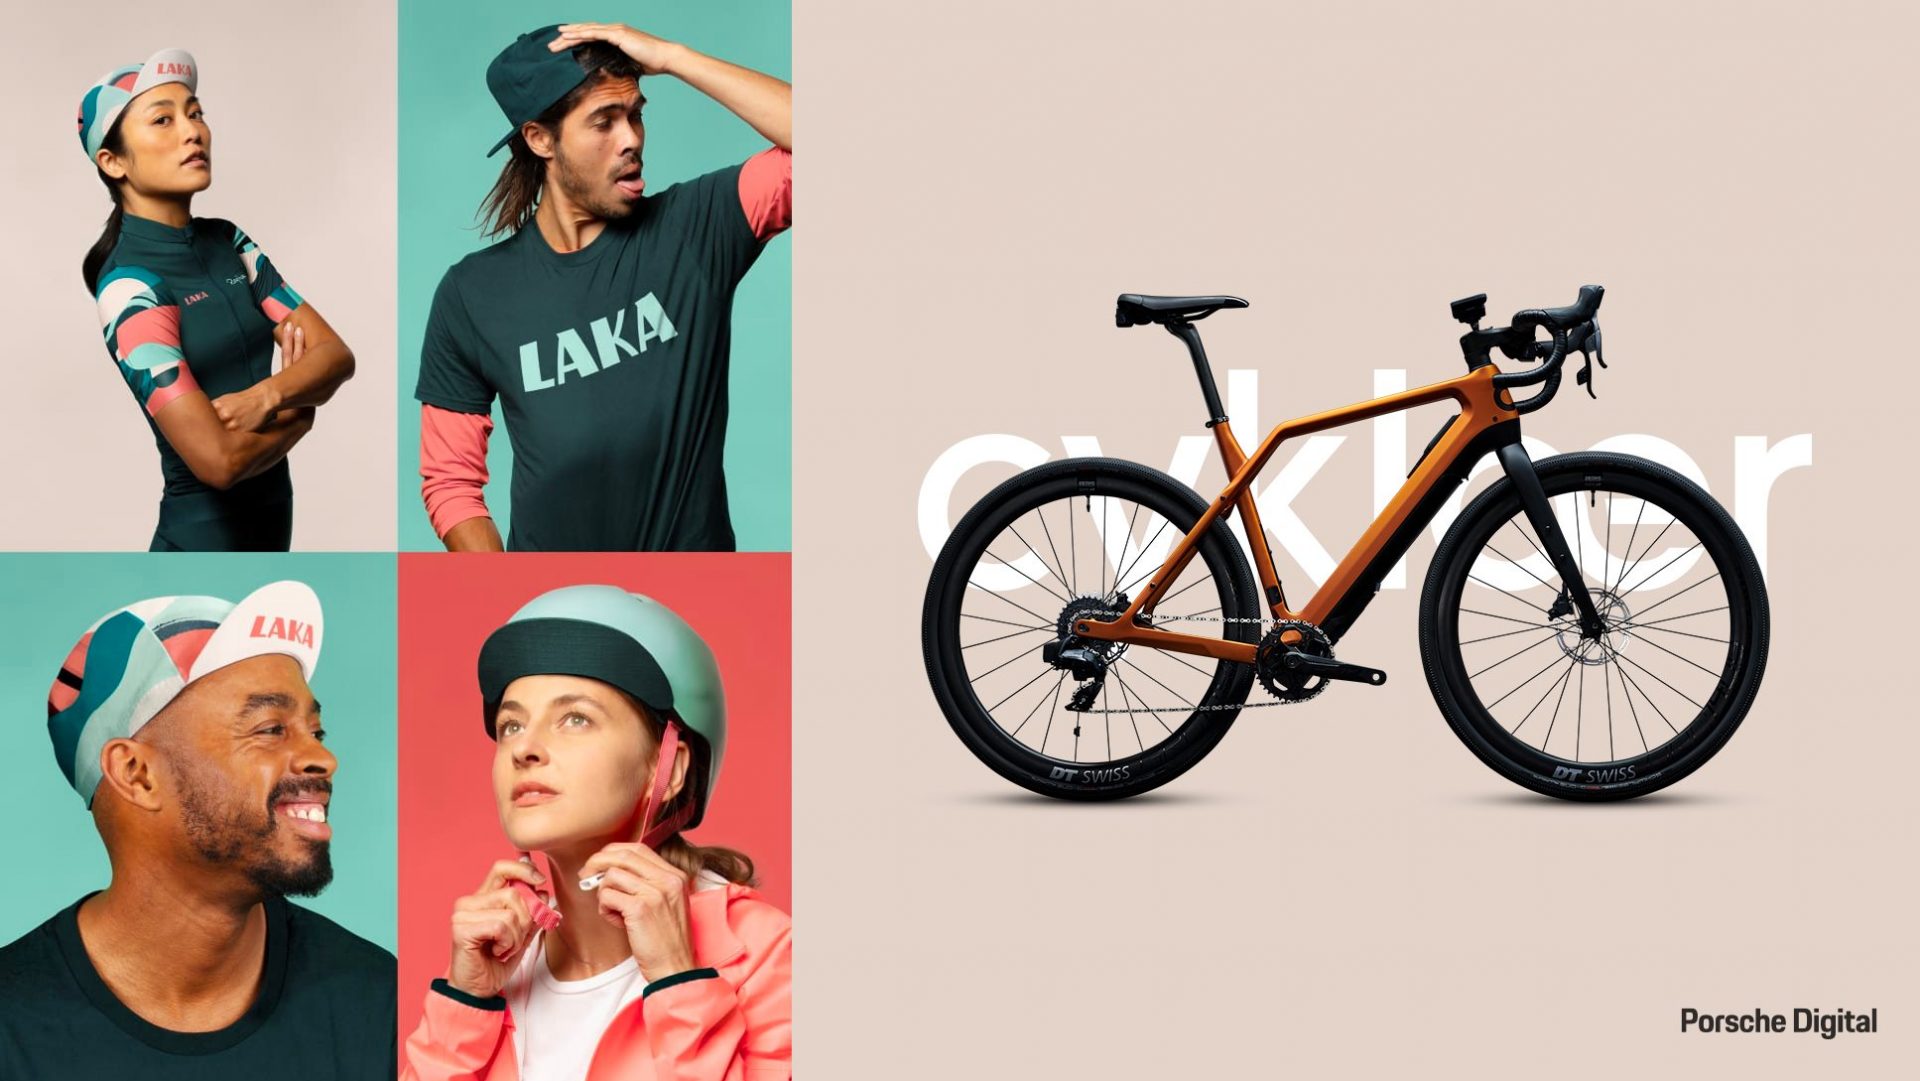 Daily Markup #604: Laka teams up with Porsche to launch fair micromobility insurance for cyclists in Germany